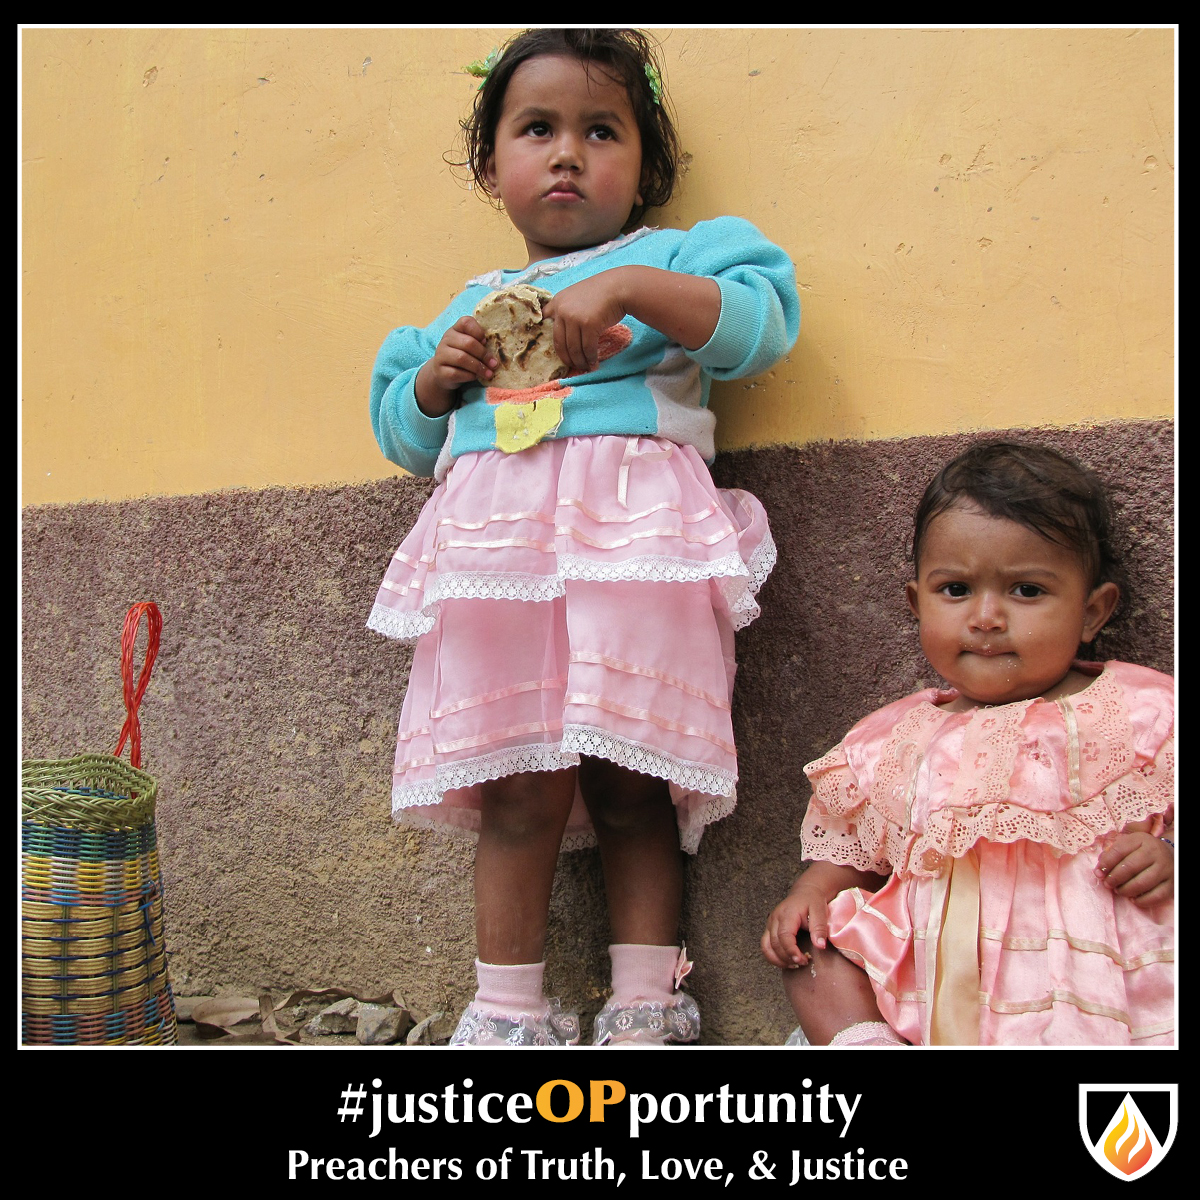 #justice OPportunity Thursday—March 11, 2021